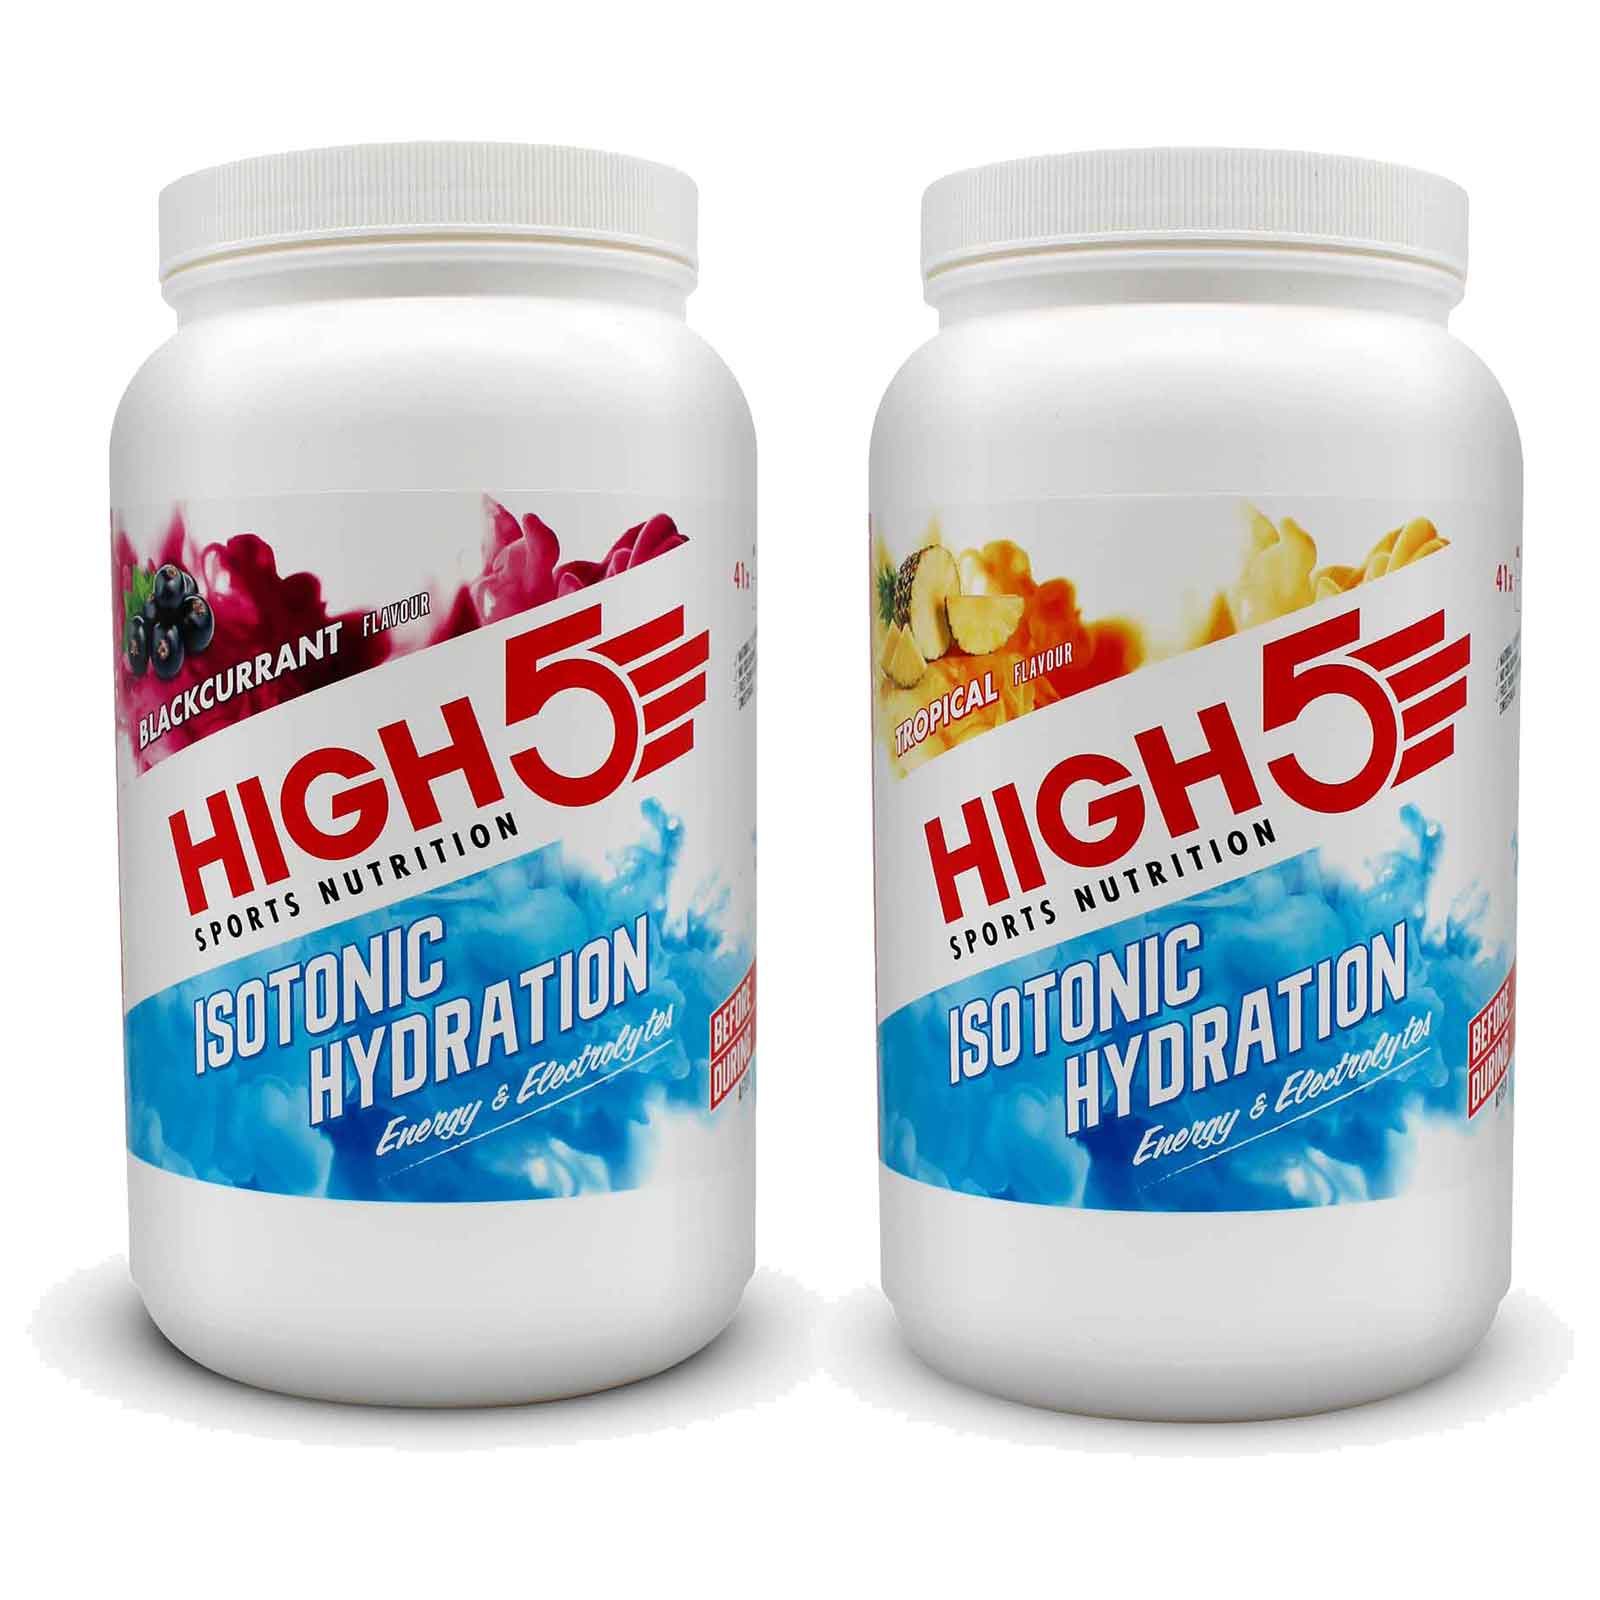 Productfoto van High5 Isotonic Hydration - Carbohydrate Beverage Powder - 1023g